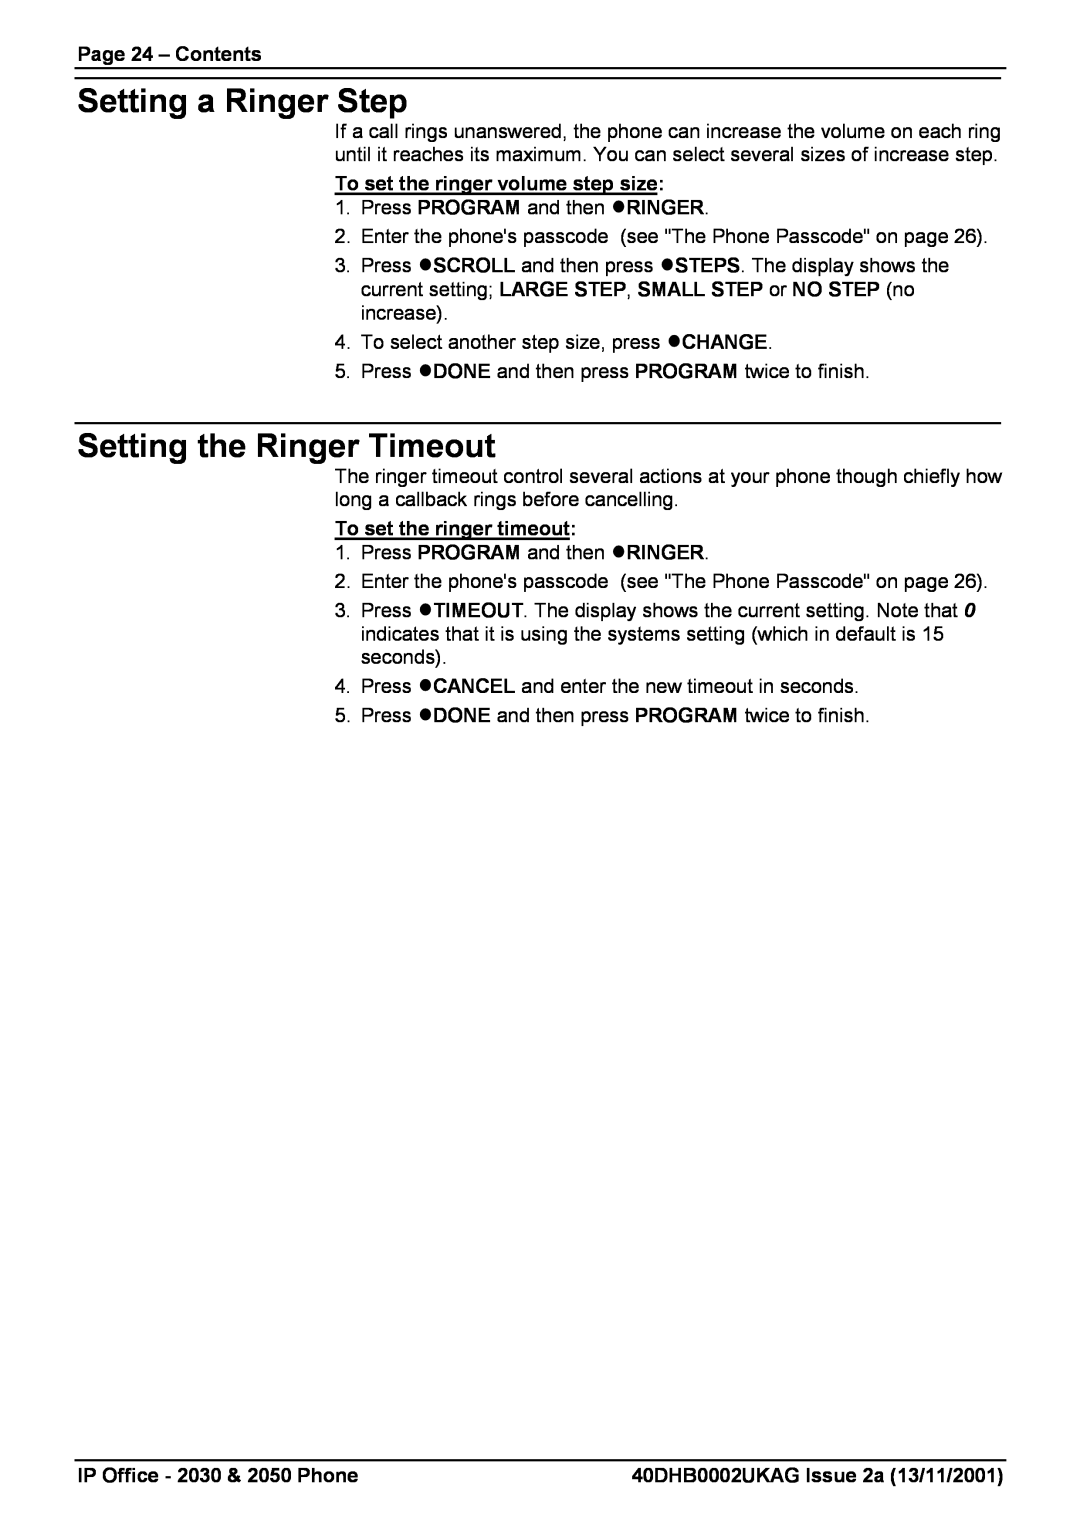 Avaya 2050, 2030 Setting a Ringer Step, Setting the Ringer Timeout, Page 24 - Contents, To set the ringer volume step size 